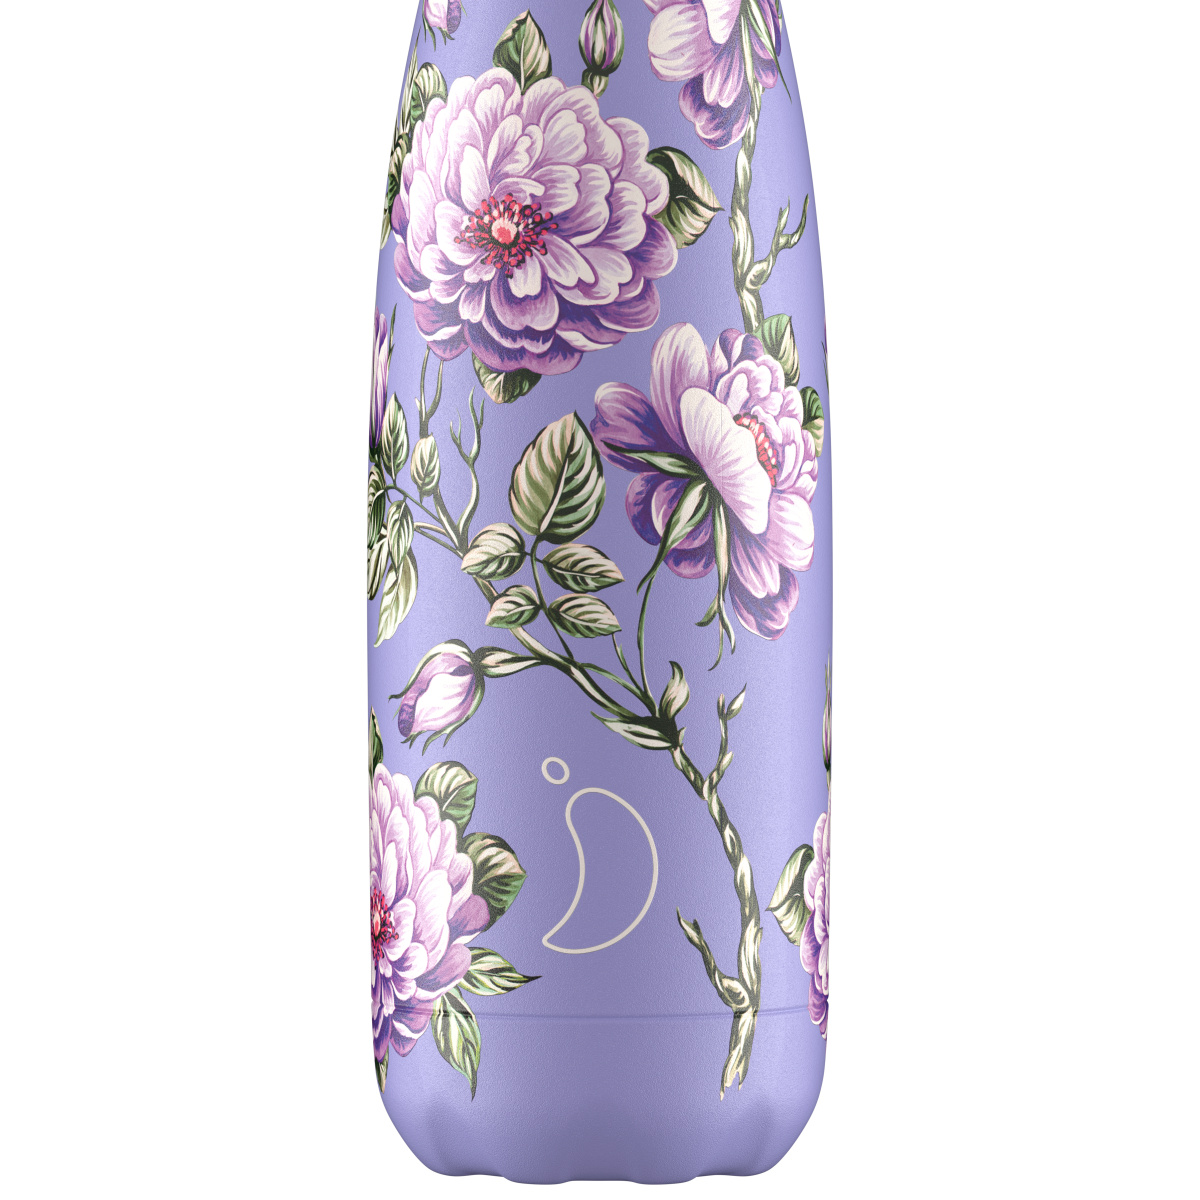 BOTELLA CHILLY INOX 500ML FLORAL VIOLET ROSES - Kidshome